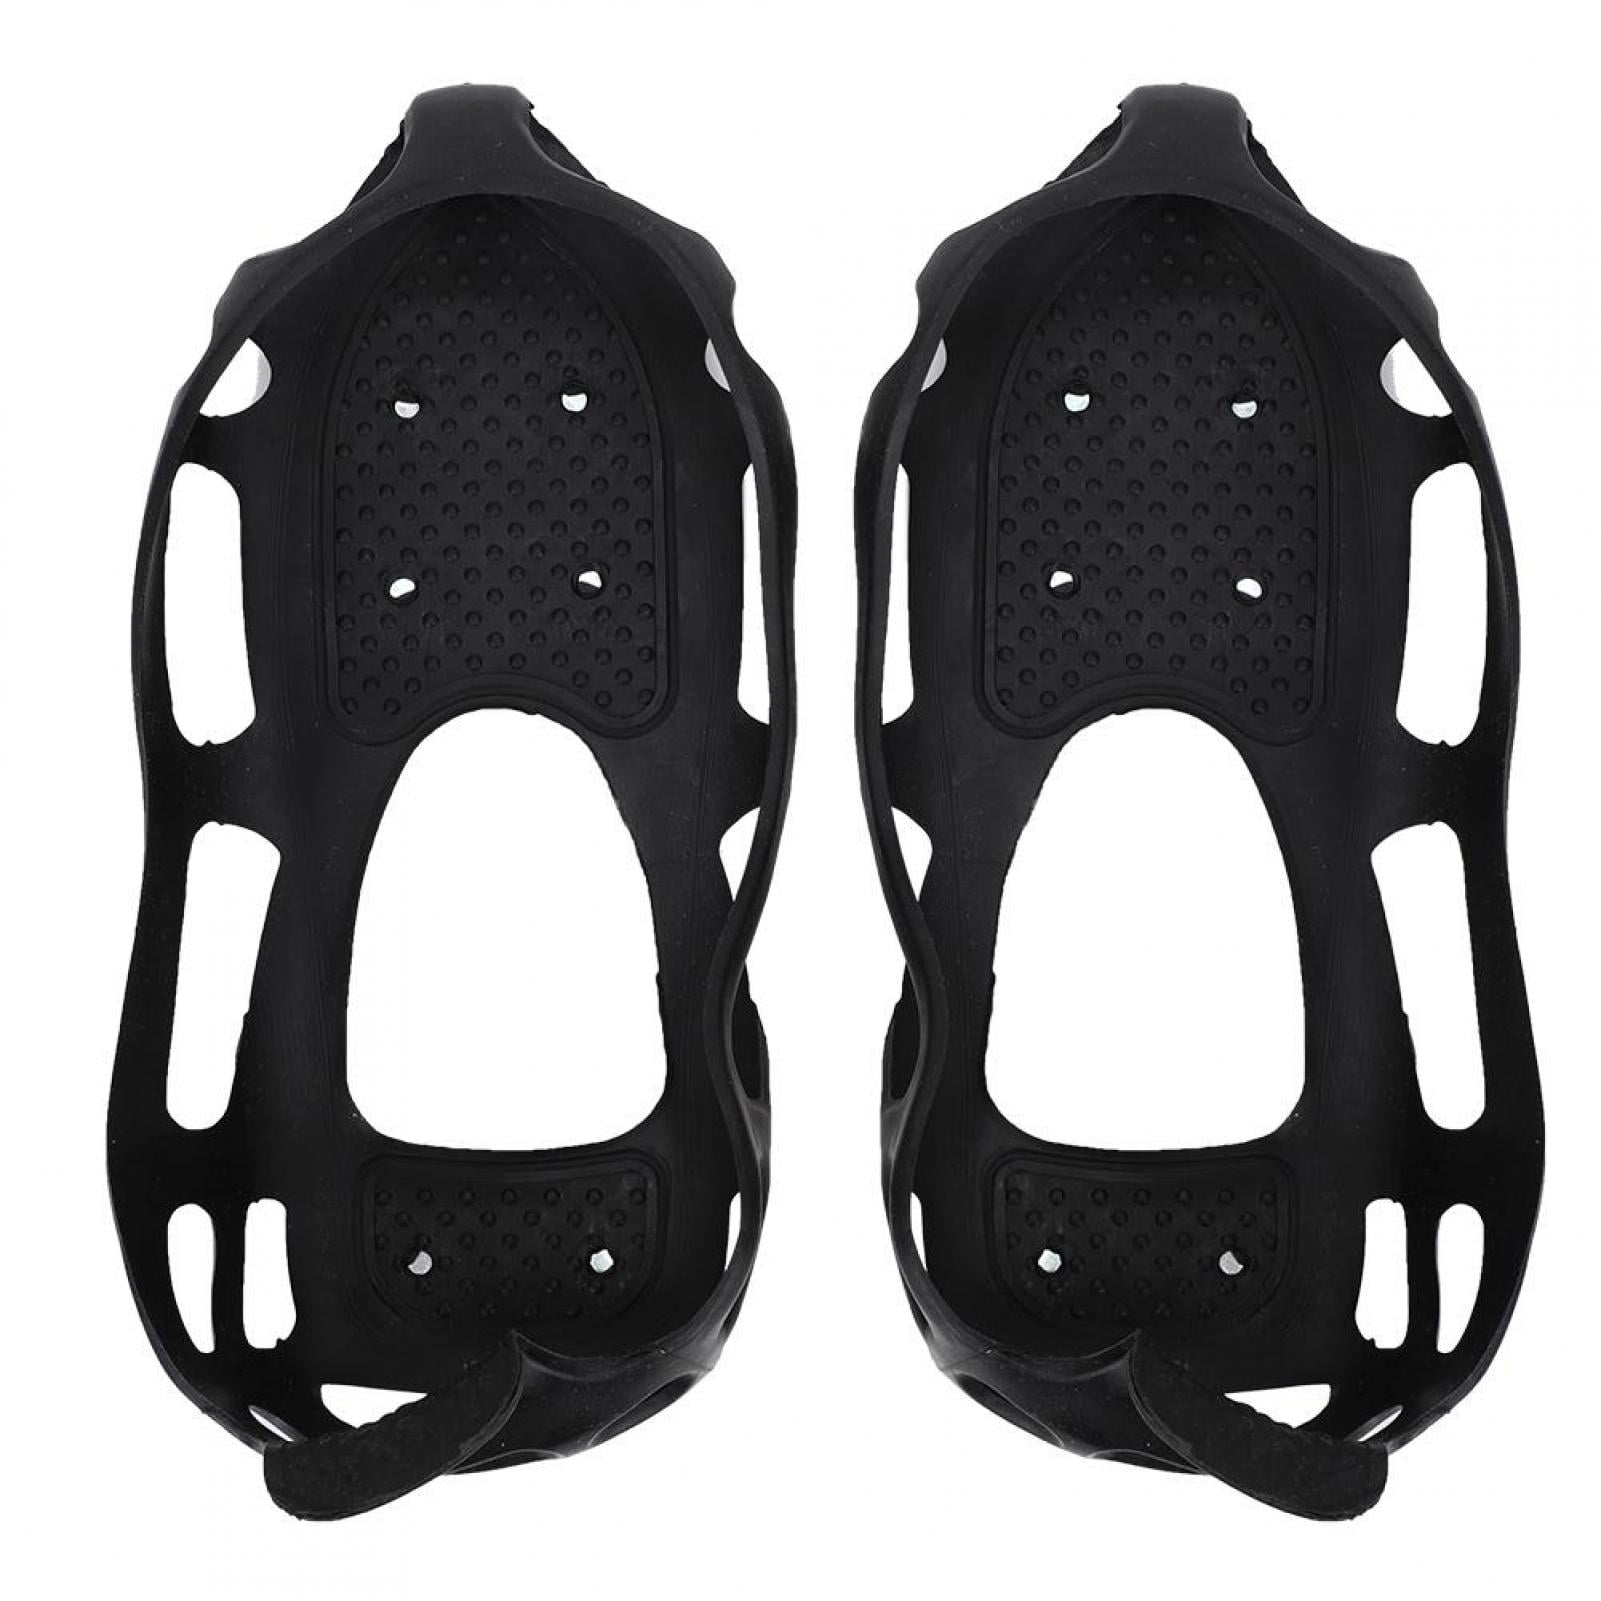 for Winter Walking Hiking Climbing Camping ORIENTOOLS Anti-Slip Ice Snow Grips 1 Pair Snow Traction Cleats with 24 Teeth S/M/L/XL, Black 